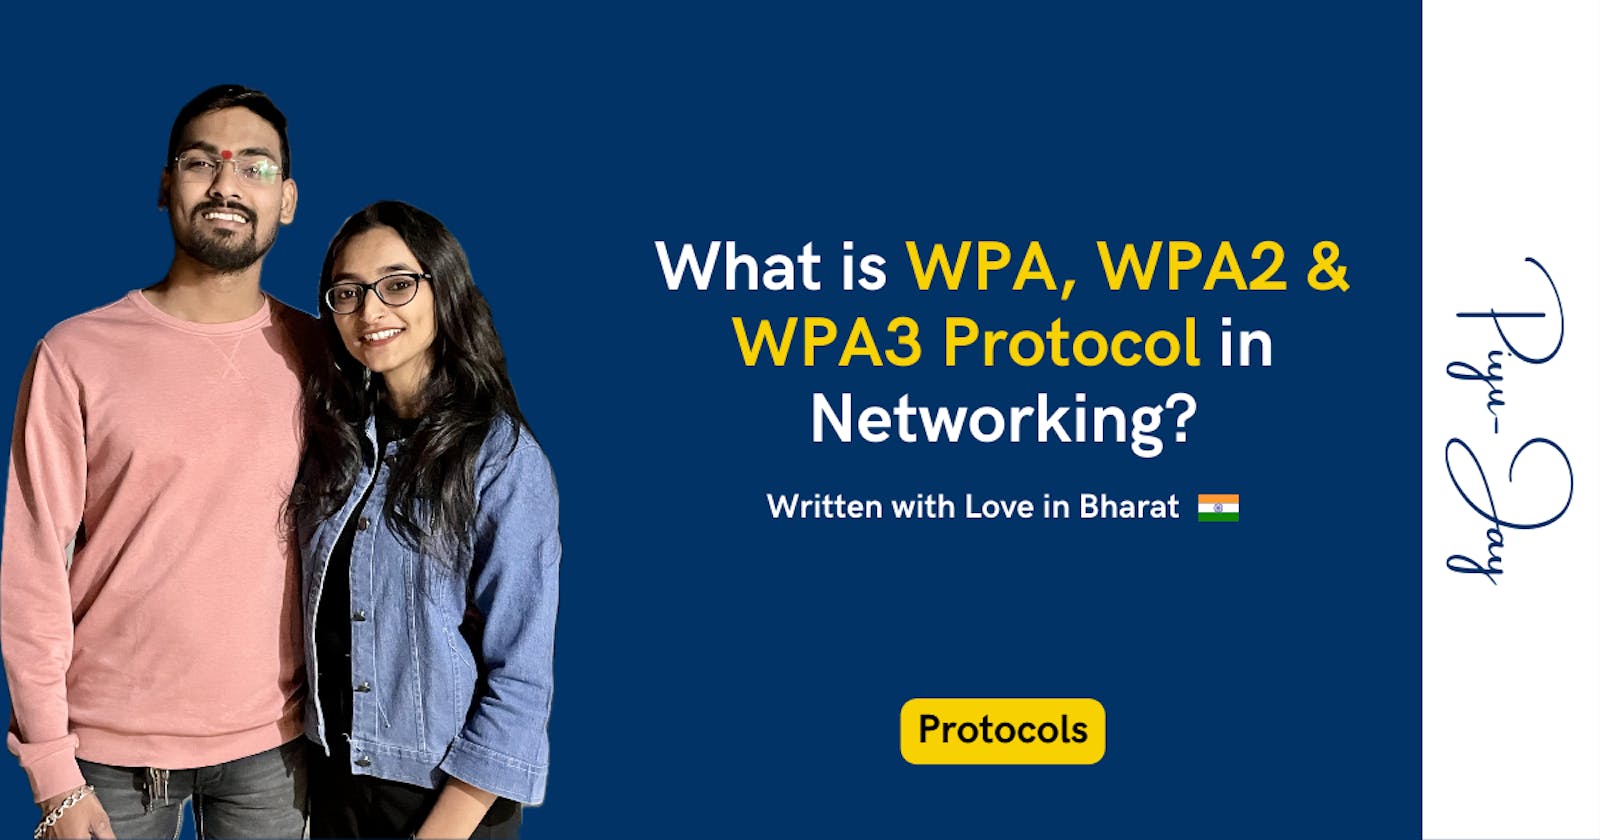 What is the WPA, WPA2 and WPA3 Protocol?